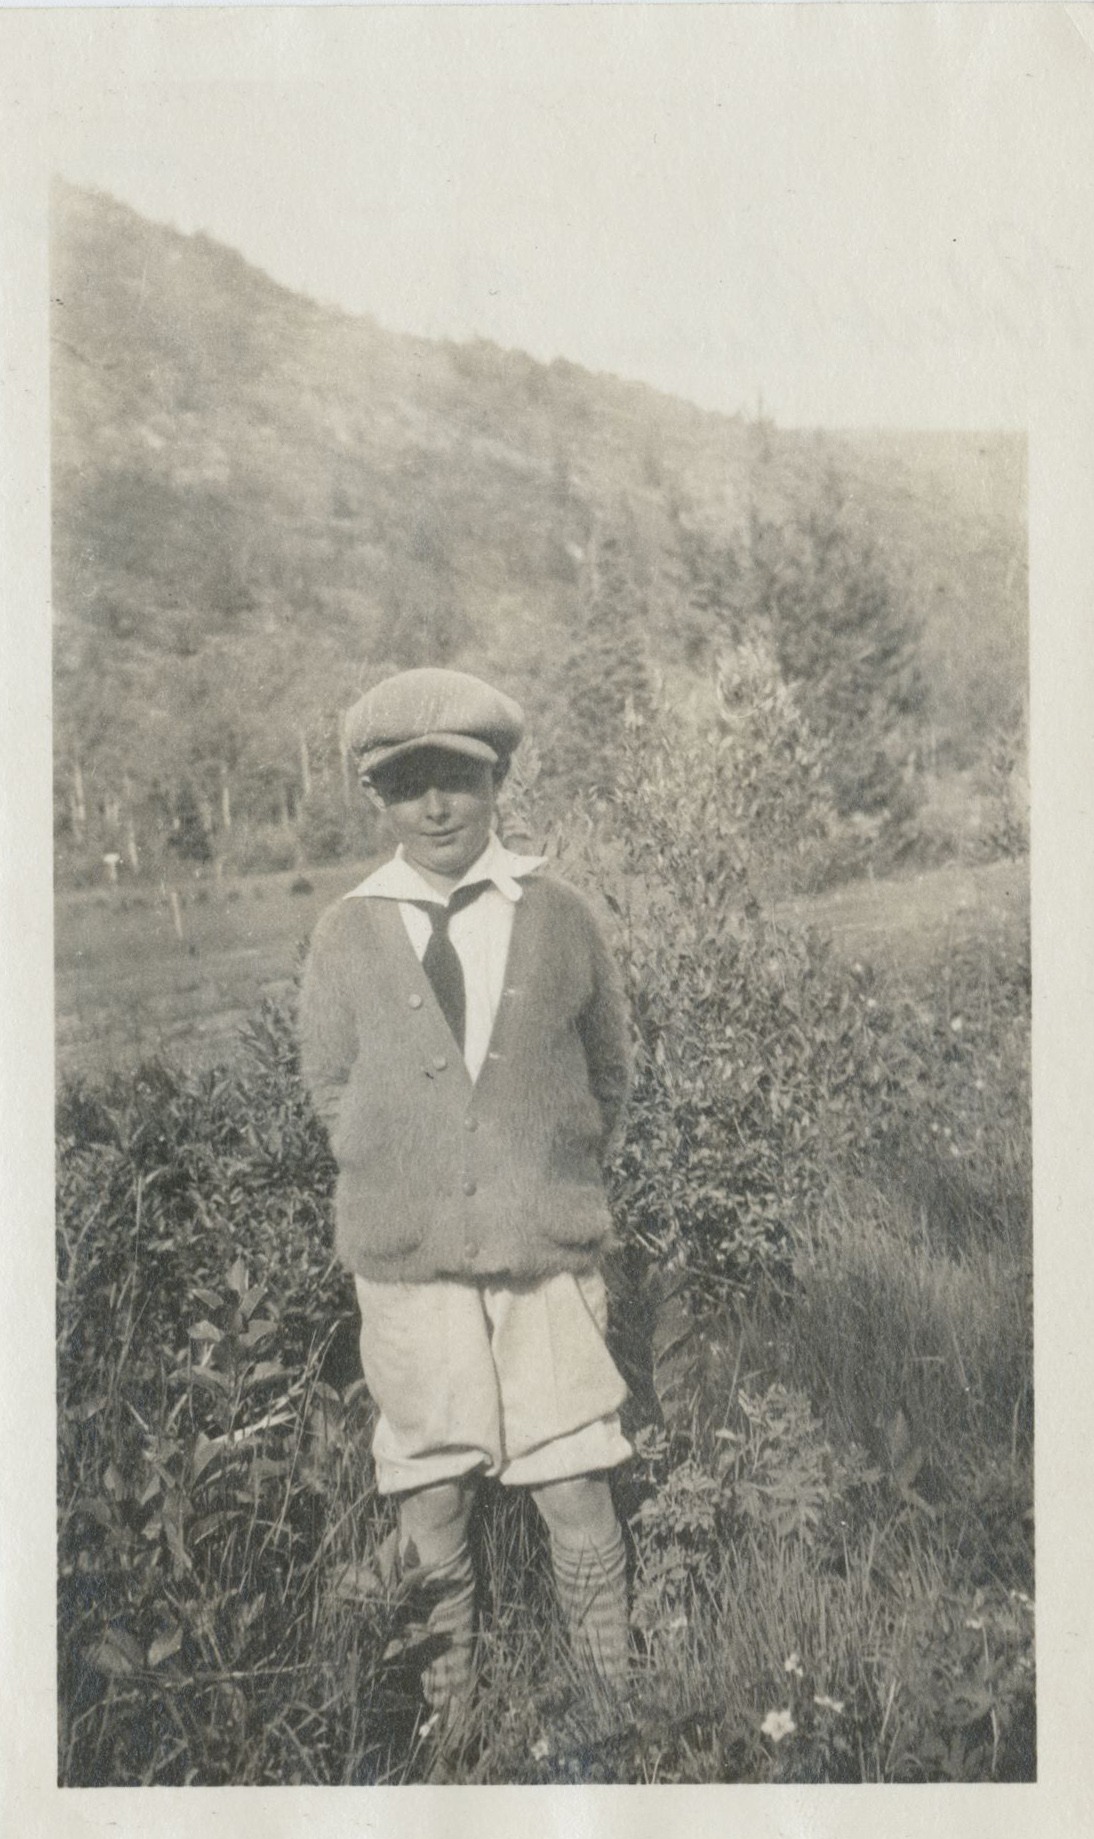 Motherwell, approximately age ten, ca. 1925